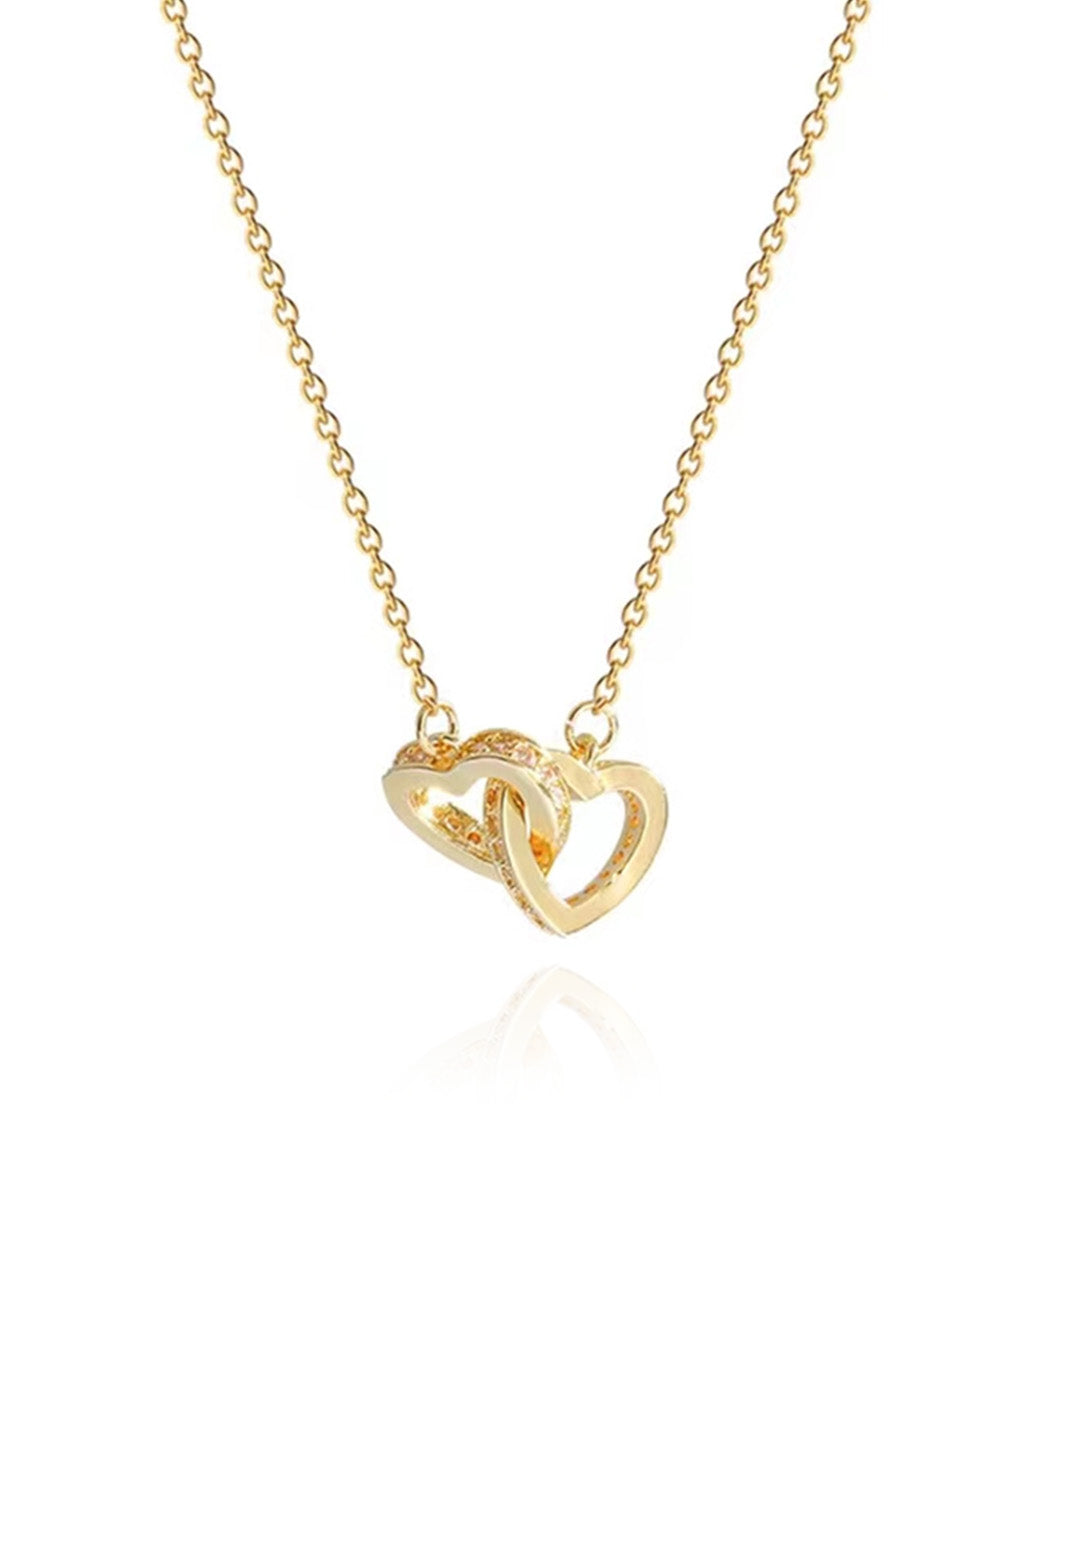 Love Connector with Cubic Zirconia Pendant Chain Necklace in Gold